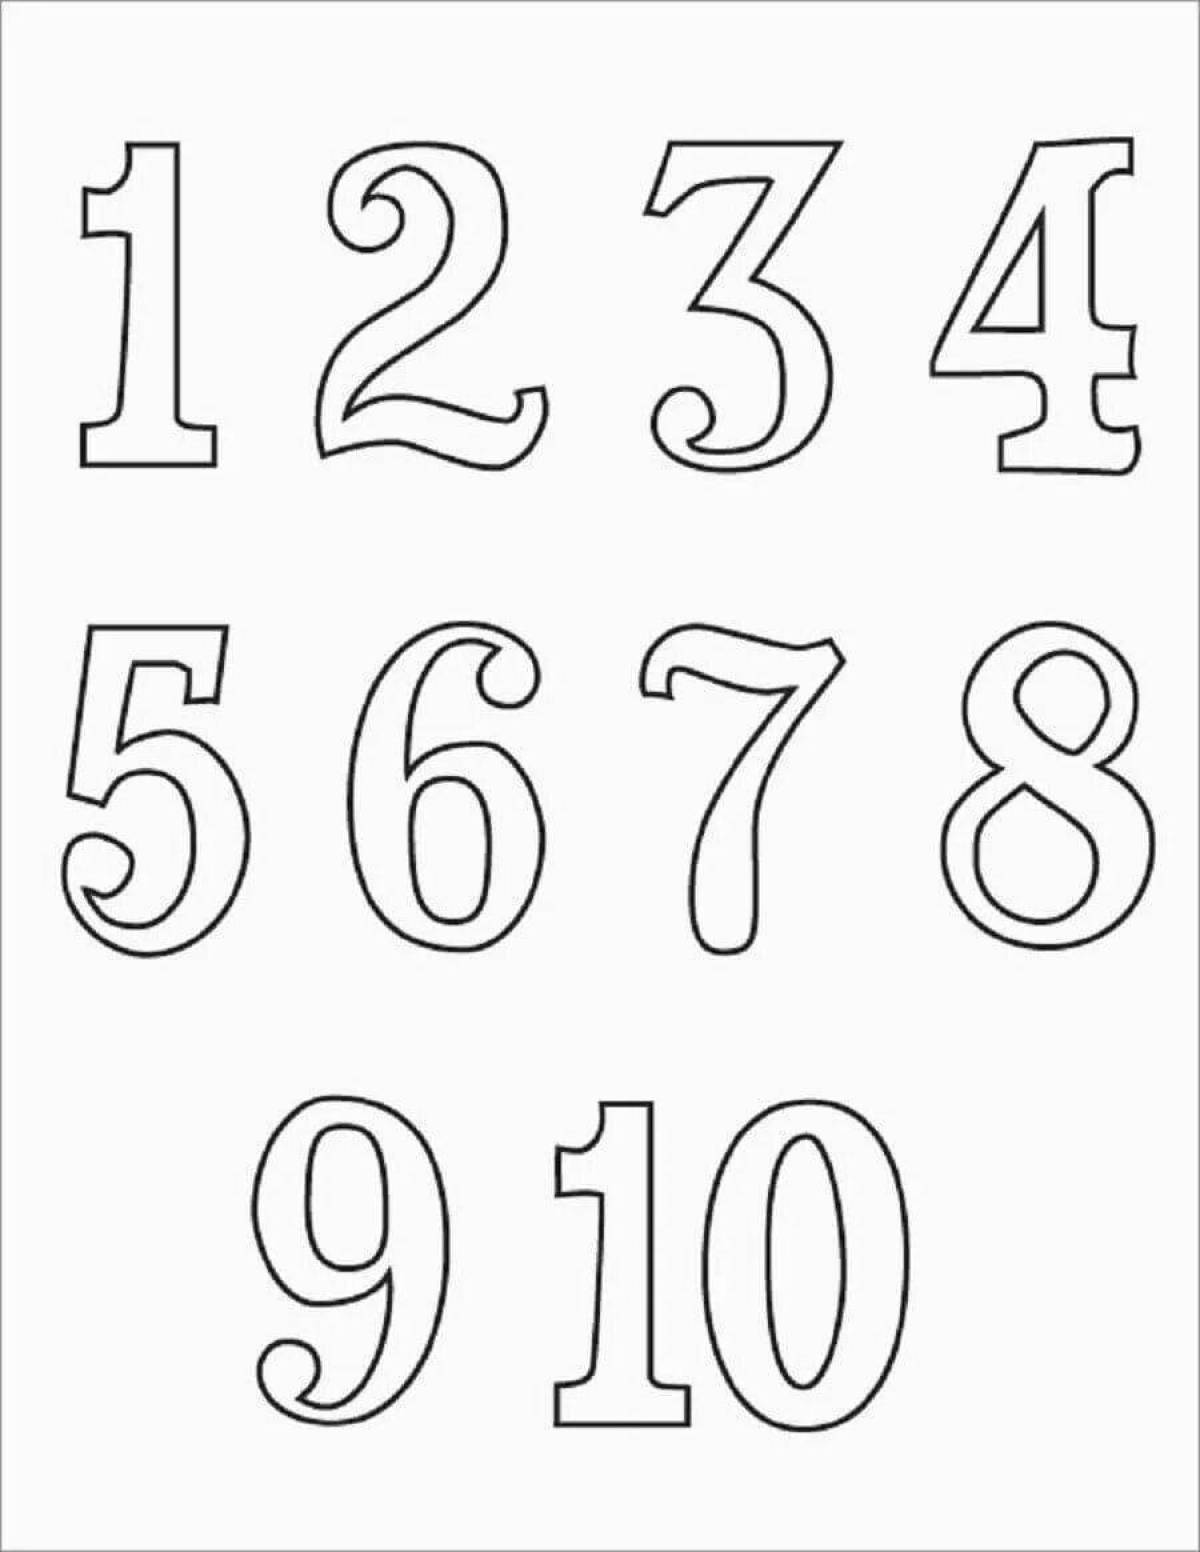 Fun coloring pages with page numbers up to 20